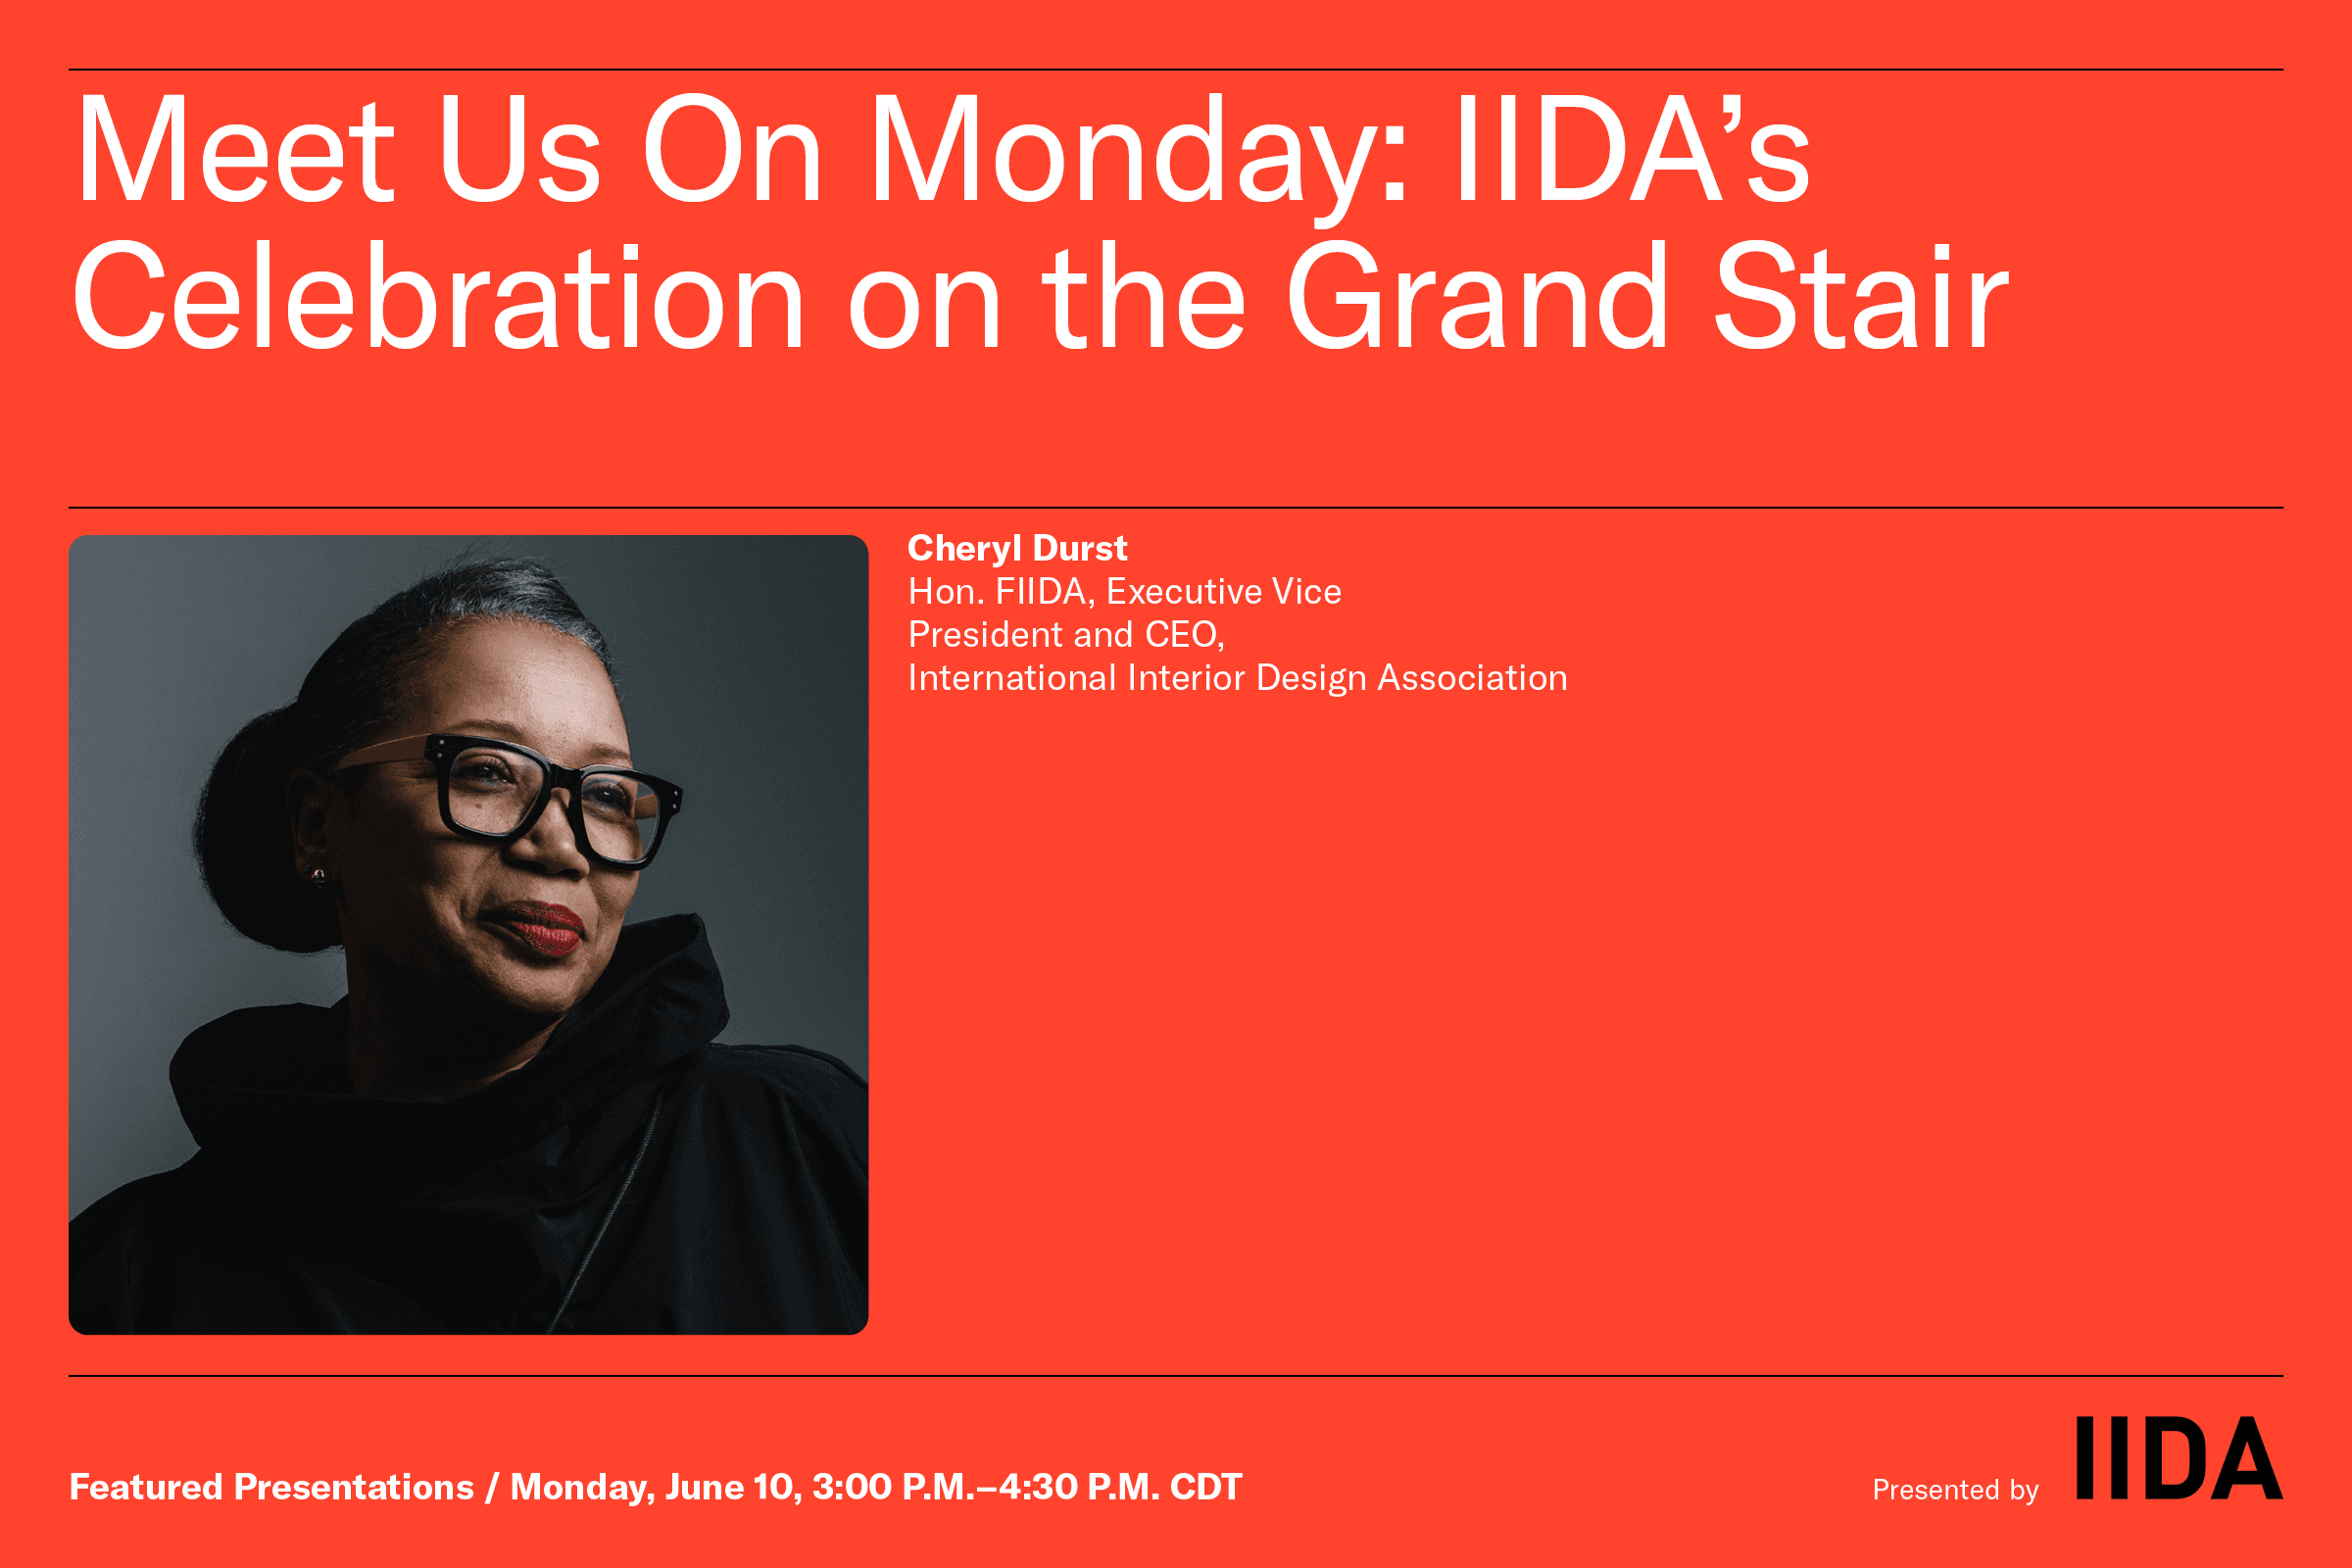 Meet Us On Monday: IIDA's Celebration on the Grand Stair - Cheryl Durst, Hon. FIIDA, Executive Vice President and CEO, International Interior Design Association - Featured Presentations / Monday, June 10, 3:00 p.m. - 4:30 p.m. CDT - Presented by IIDA